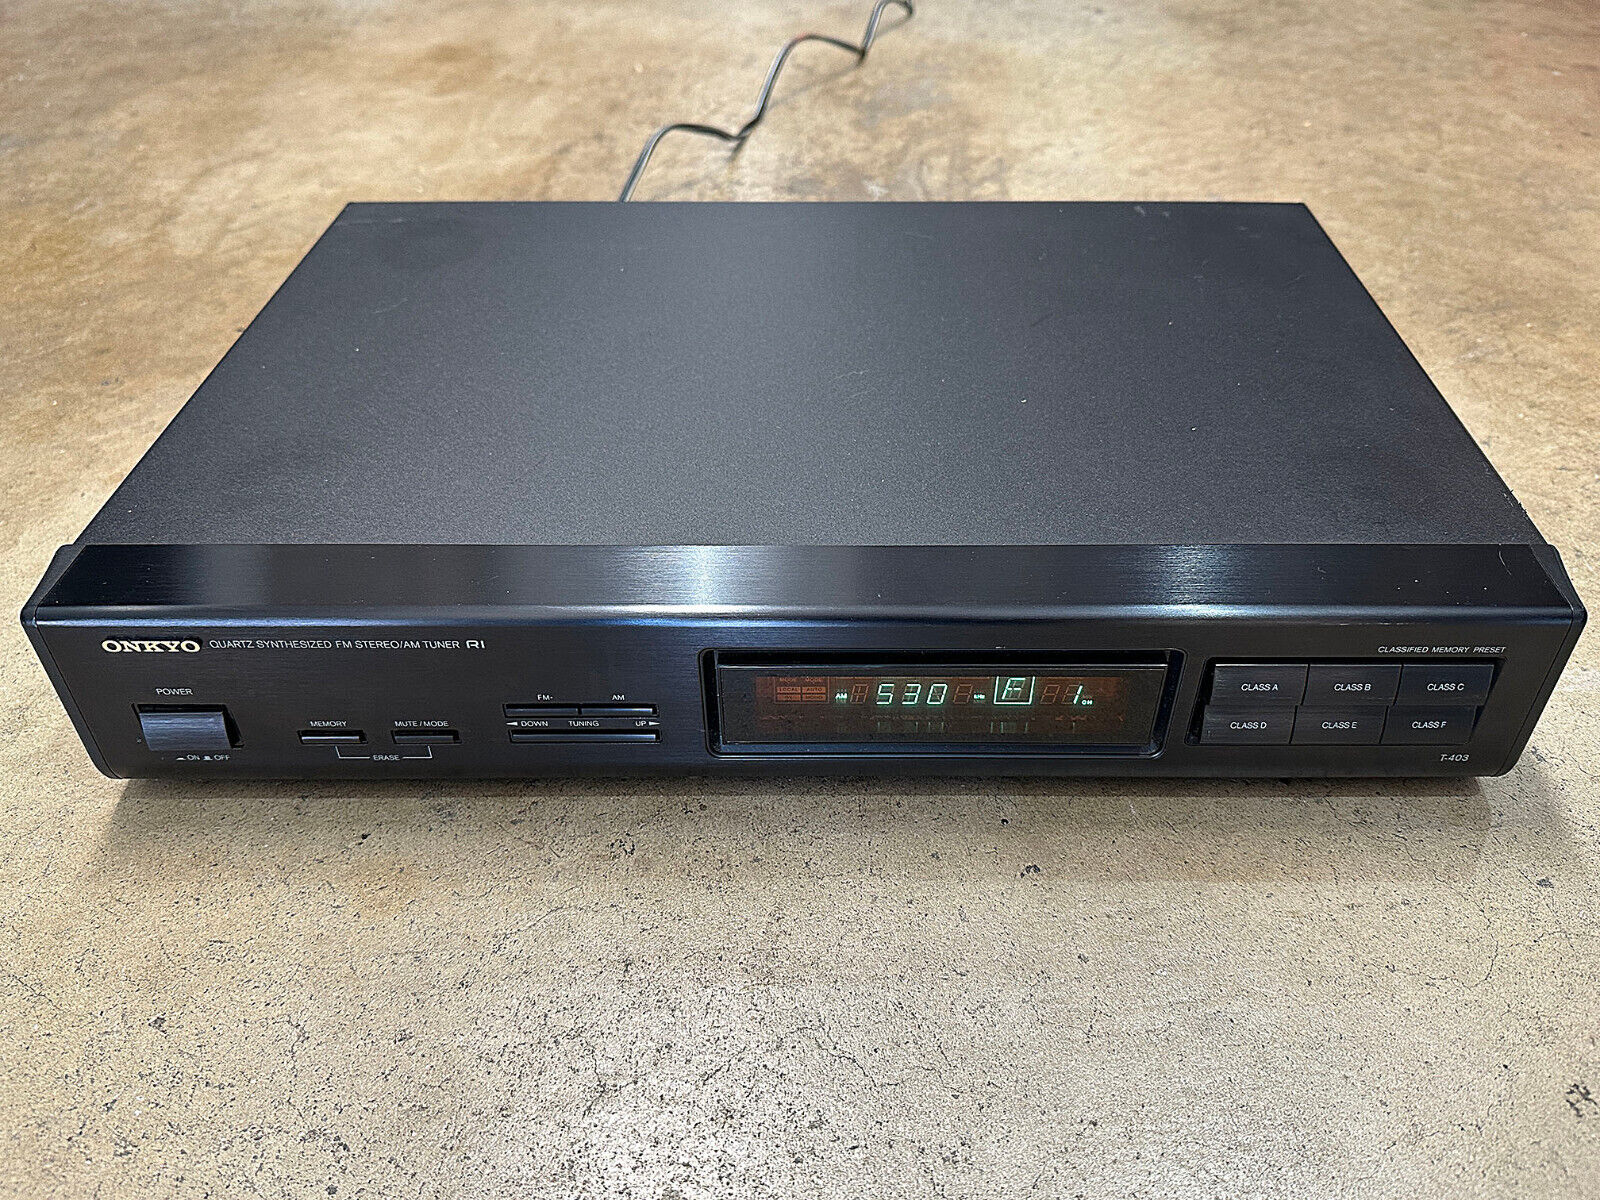 Onkyo T-403 Quartz Synthesized AM-FM Stereo Tuner Tested + 30-Days Guarantee